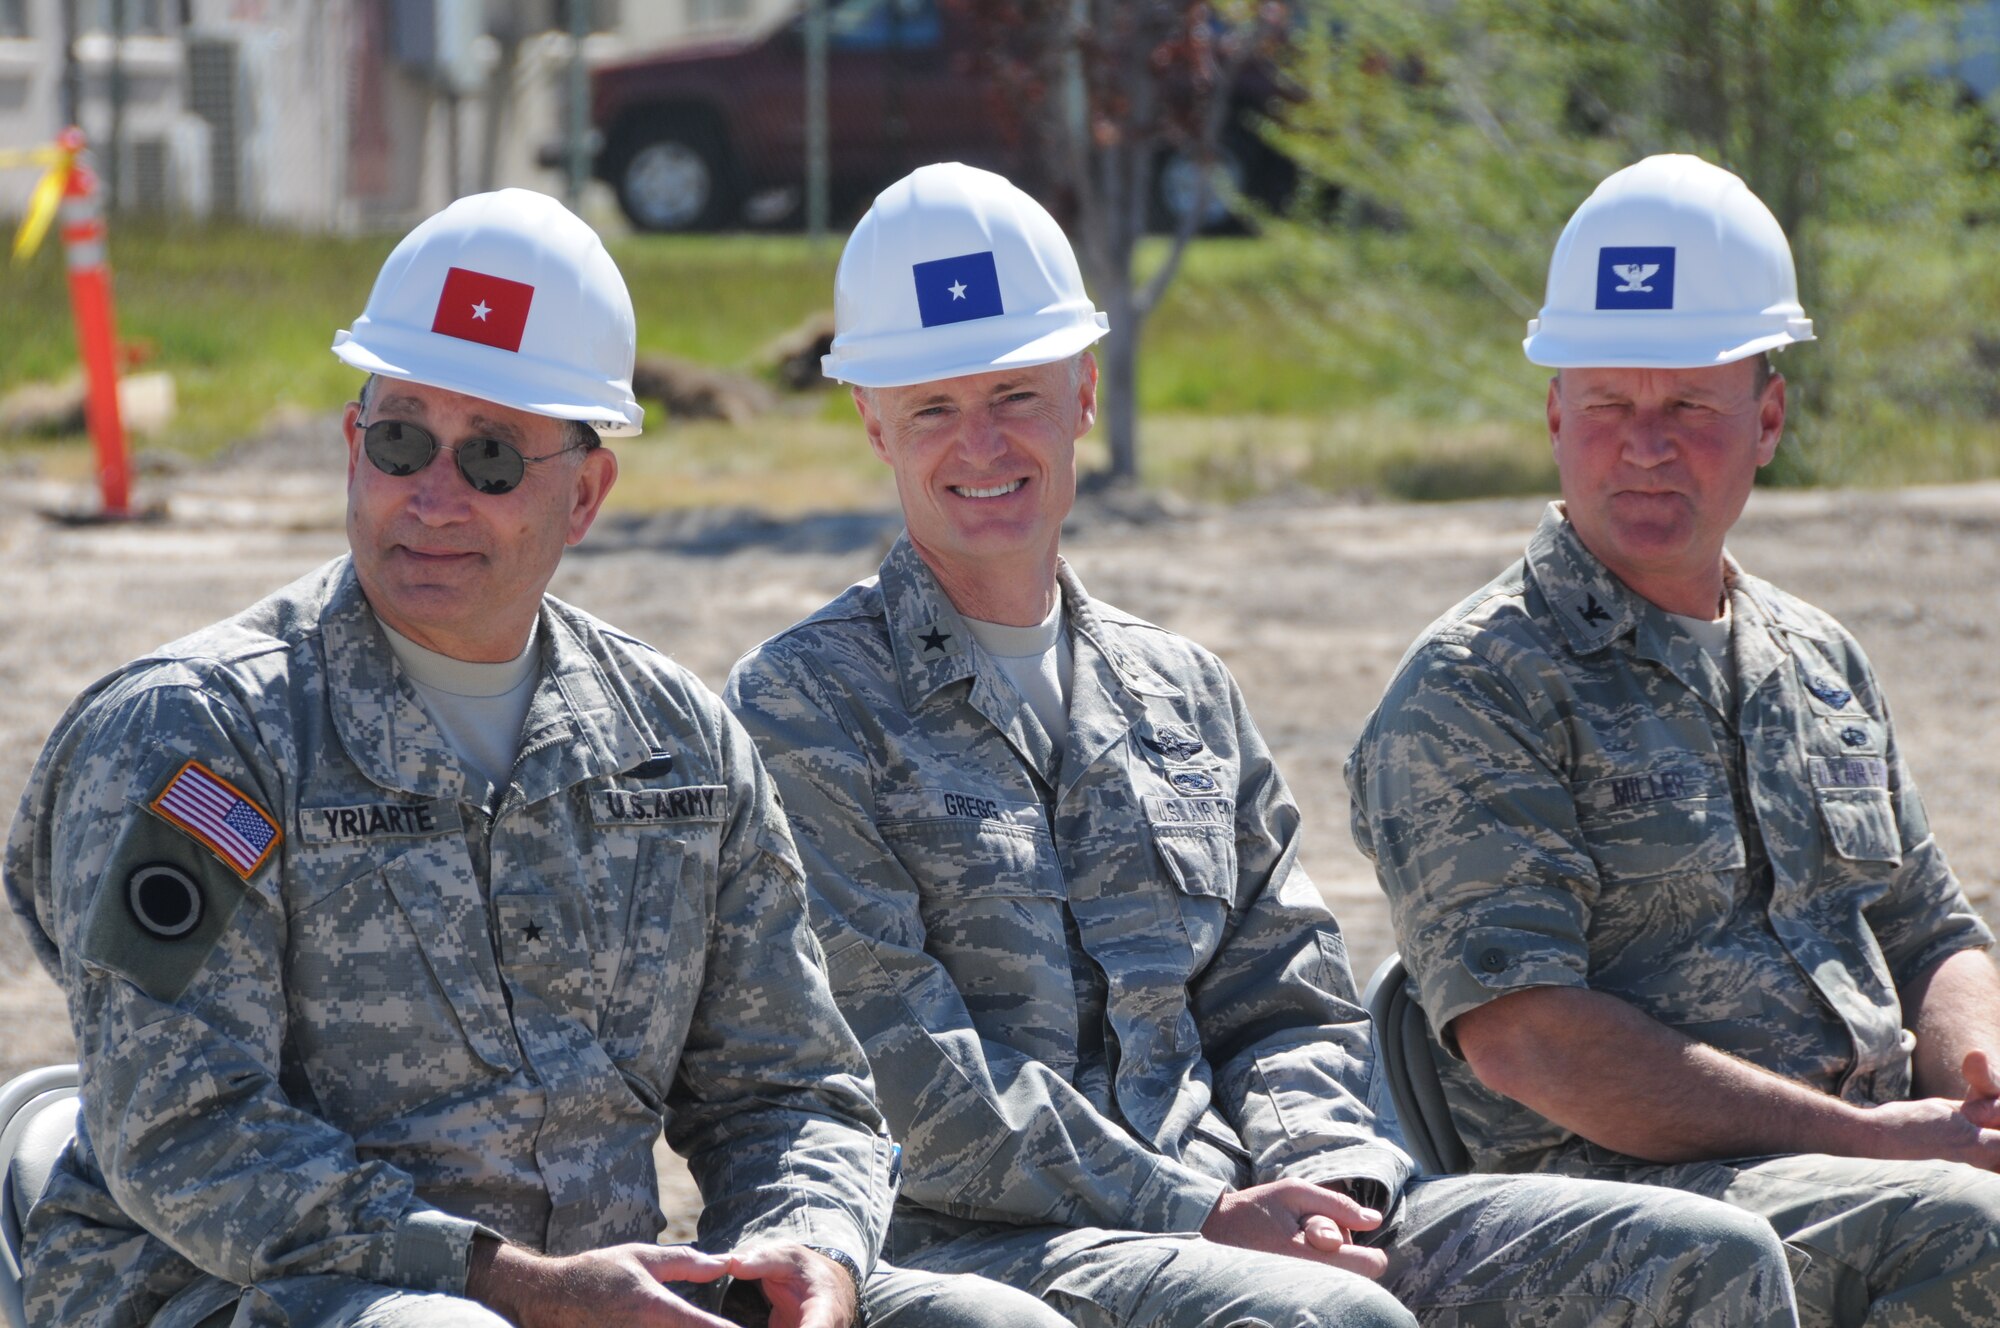 Brig. Gen. Charles L. Yriarte, Oregon Army National Guard Land Component Commander, Brig. Gen. Steven D. Gregg, Oregon Air National Guard Commander, and Col. James Miller, 173rd Fighter Wing Commander, listen to Oregon Senator Ron Wyden speak during the ground breaking ceremony for the Joint Armed Forces Reserve Center June 9, 2011 at Kingsley Field, Klamath Falls, Ore.  When completed the building will house the 173rd Security Forces Squadron and Charlie Troop, 1-82nd Cavalry, Oregon Army National Guard.  (U.S. Air Force Photo by Tech. Sgt Jennifer Shirar) RELEASED